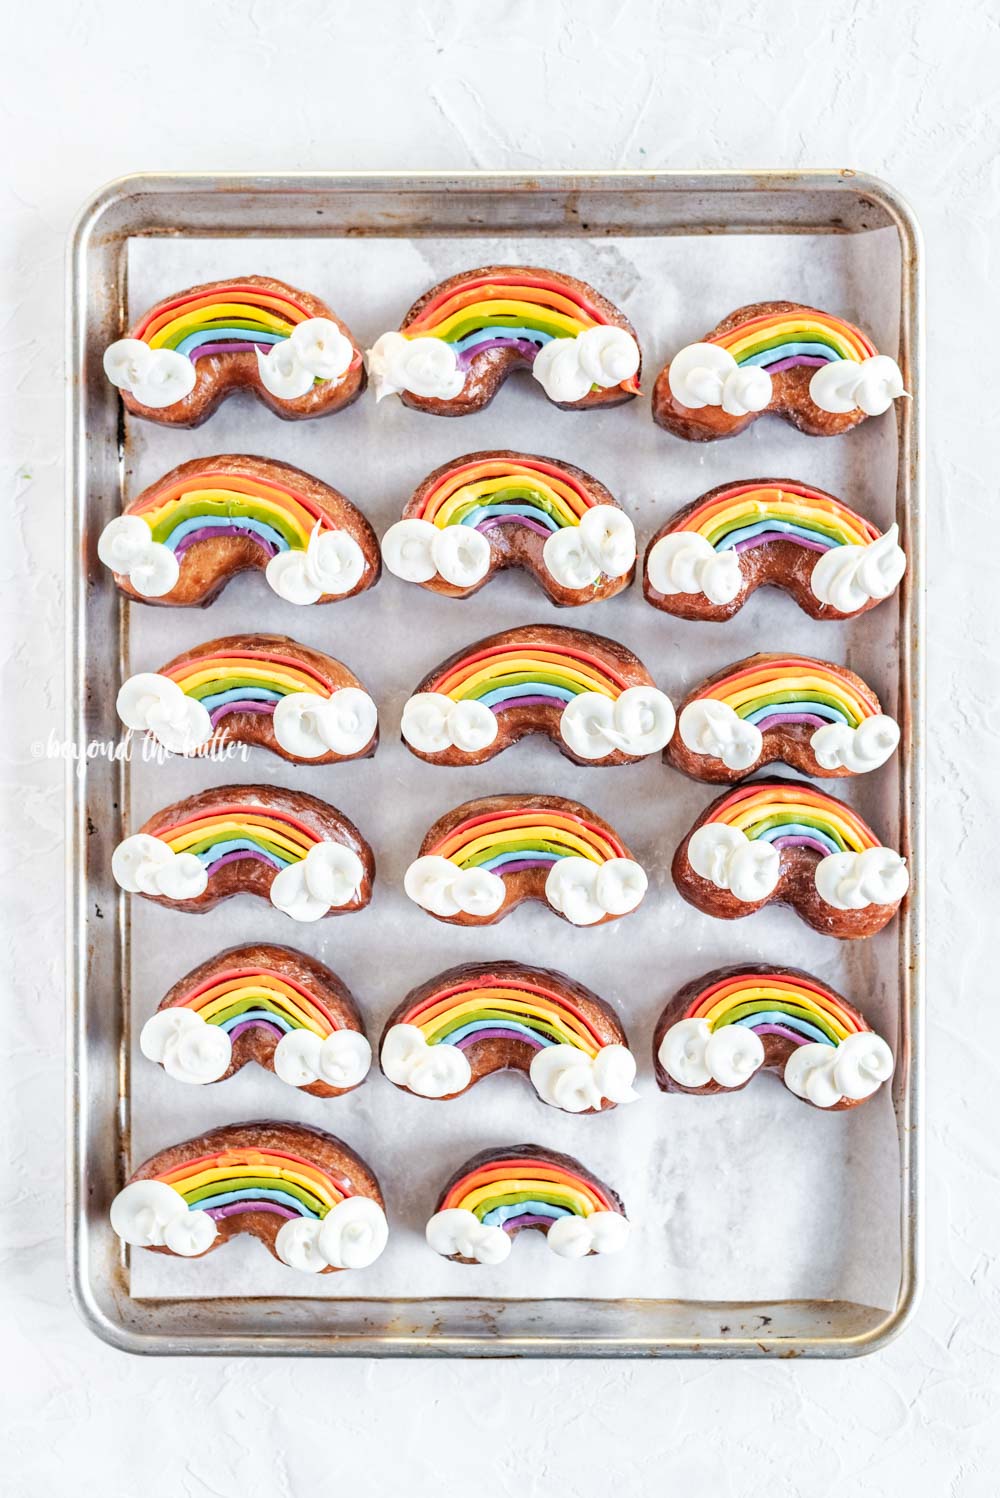 Overhead image of Rainbow Donuts on a baking sheet | All Images © Beyond the Butter, LLC